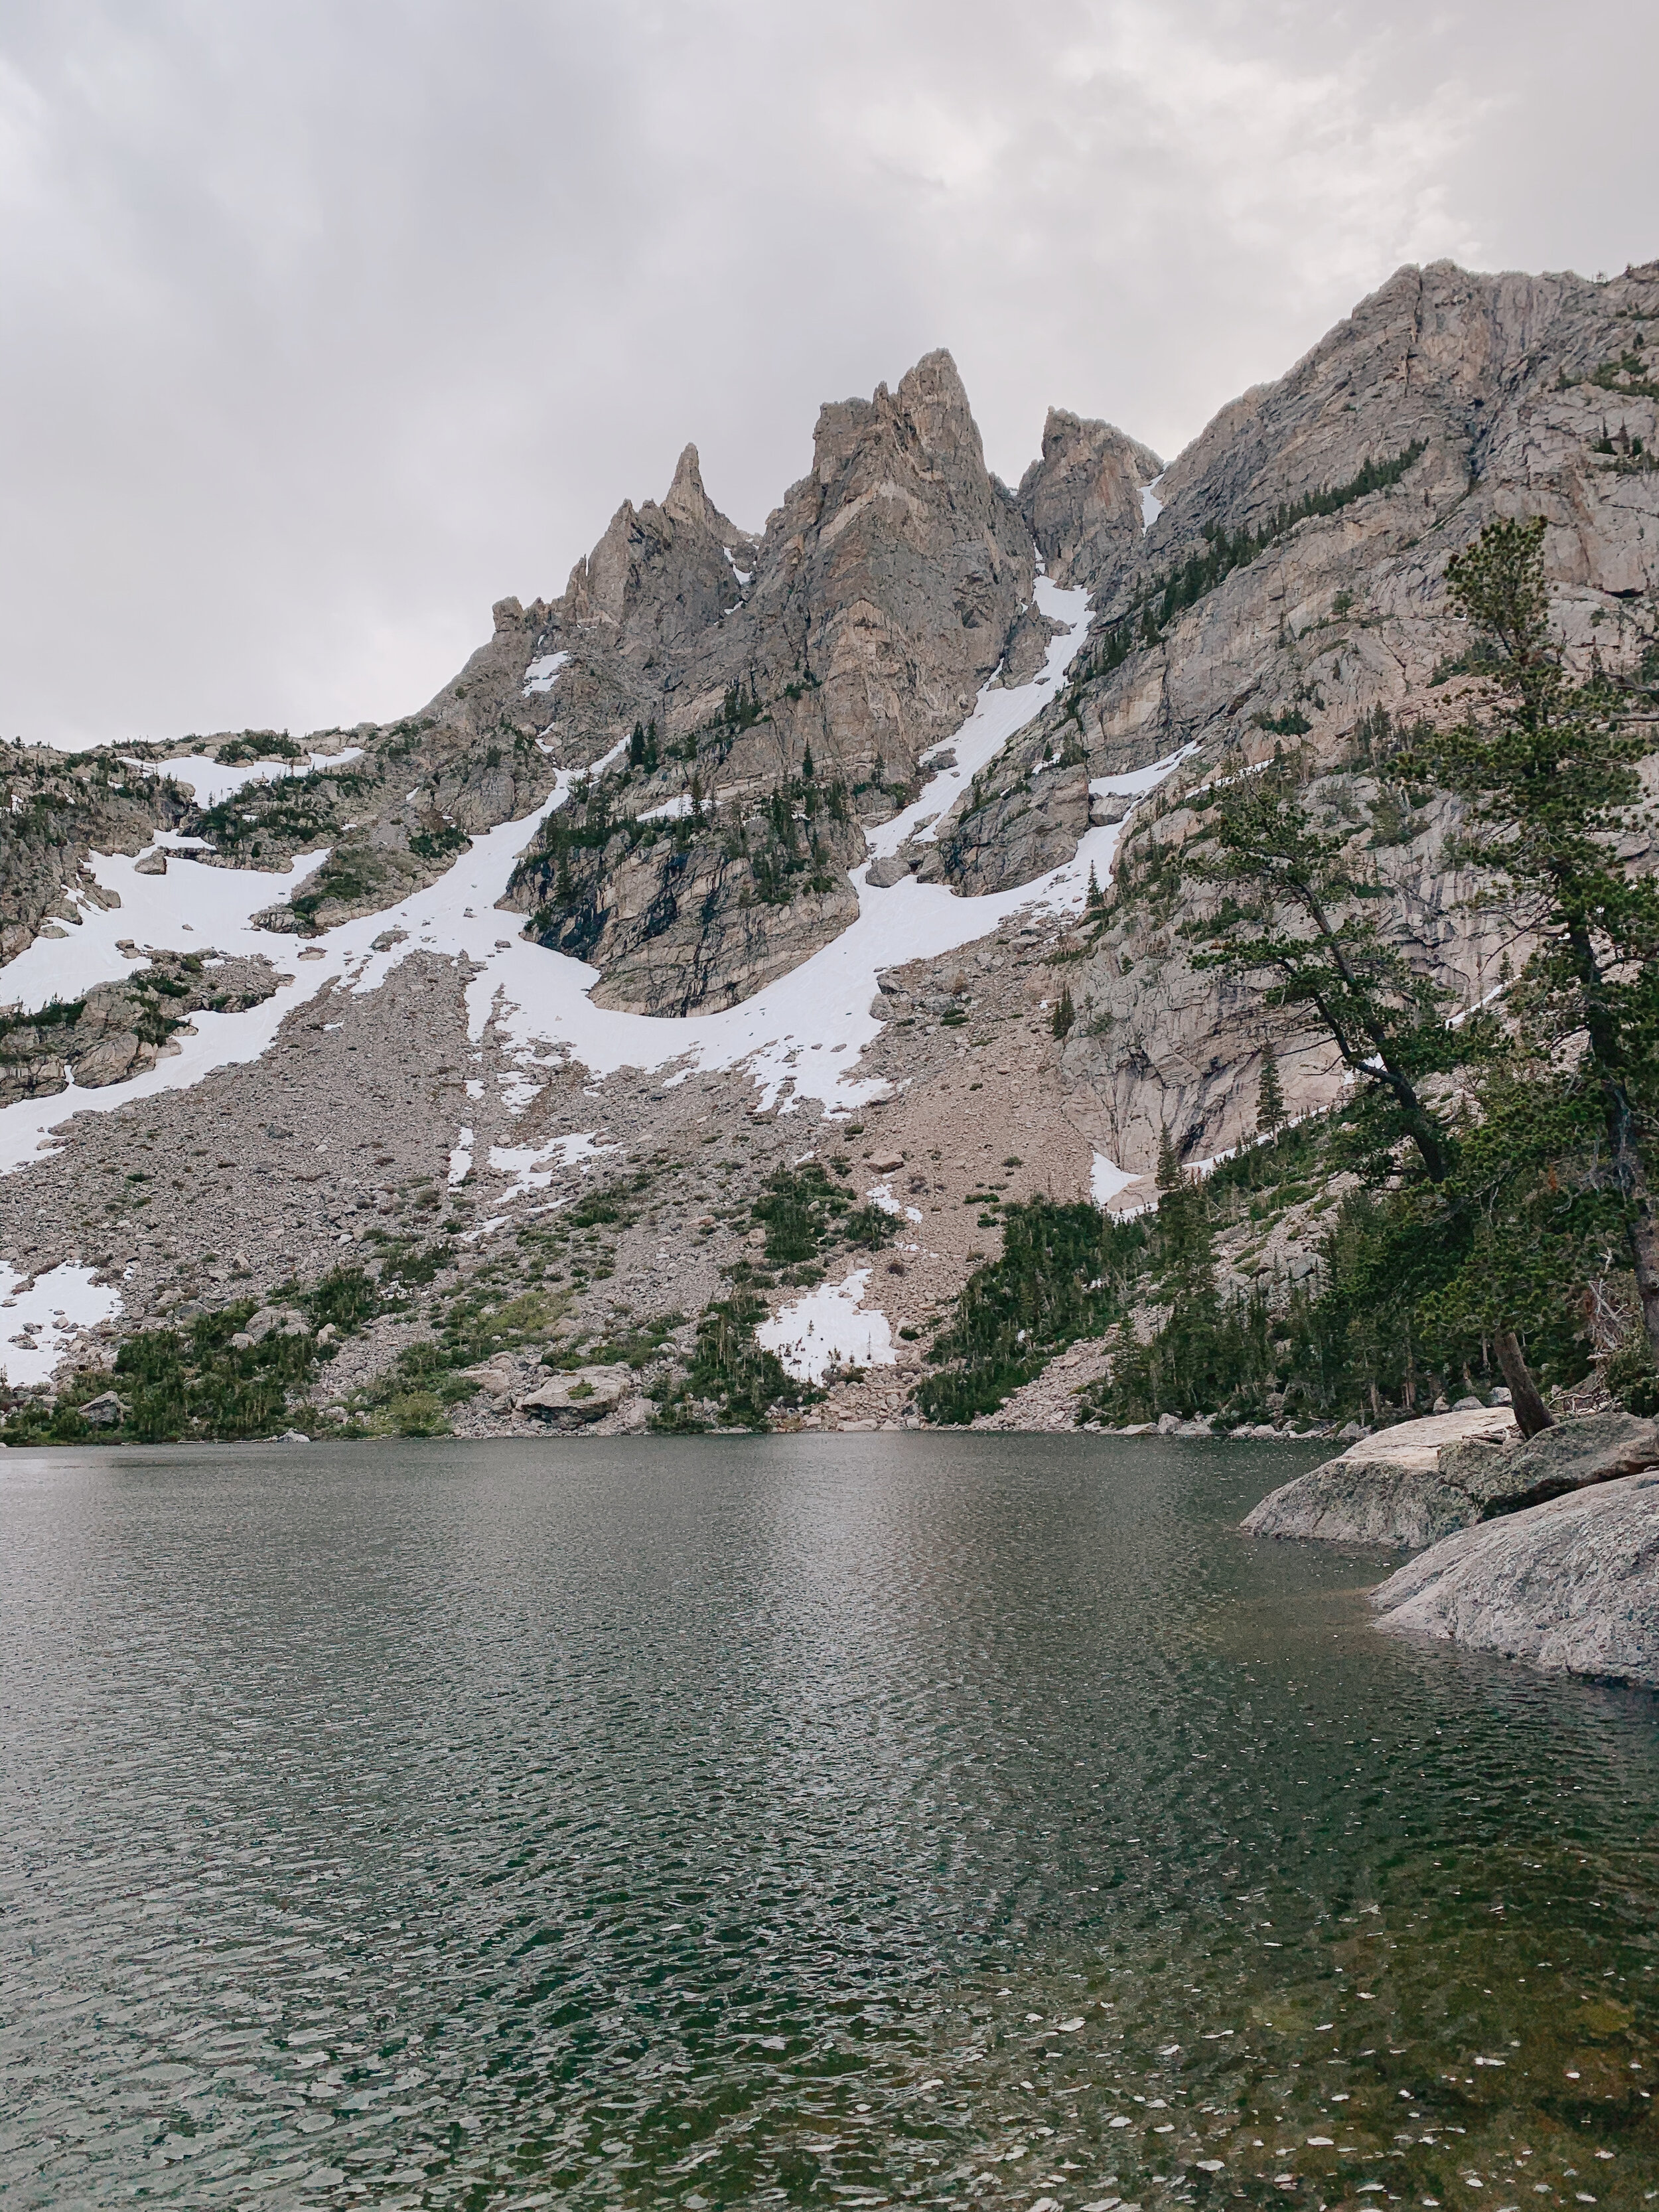  The trail to Dream and Emerald Lakes is one of the most visited within Rocky Mountain National Park. It’s popular for a reason though: this relatively easy hike takes you high into the mountains and onto the shores of pristine alpine lakes. 